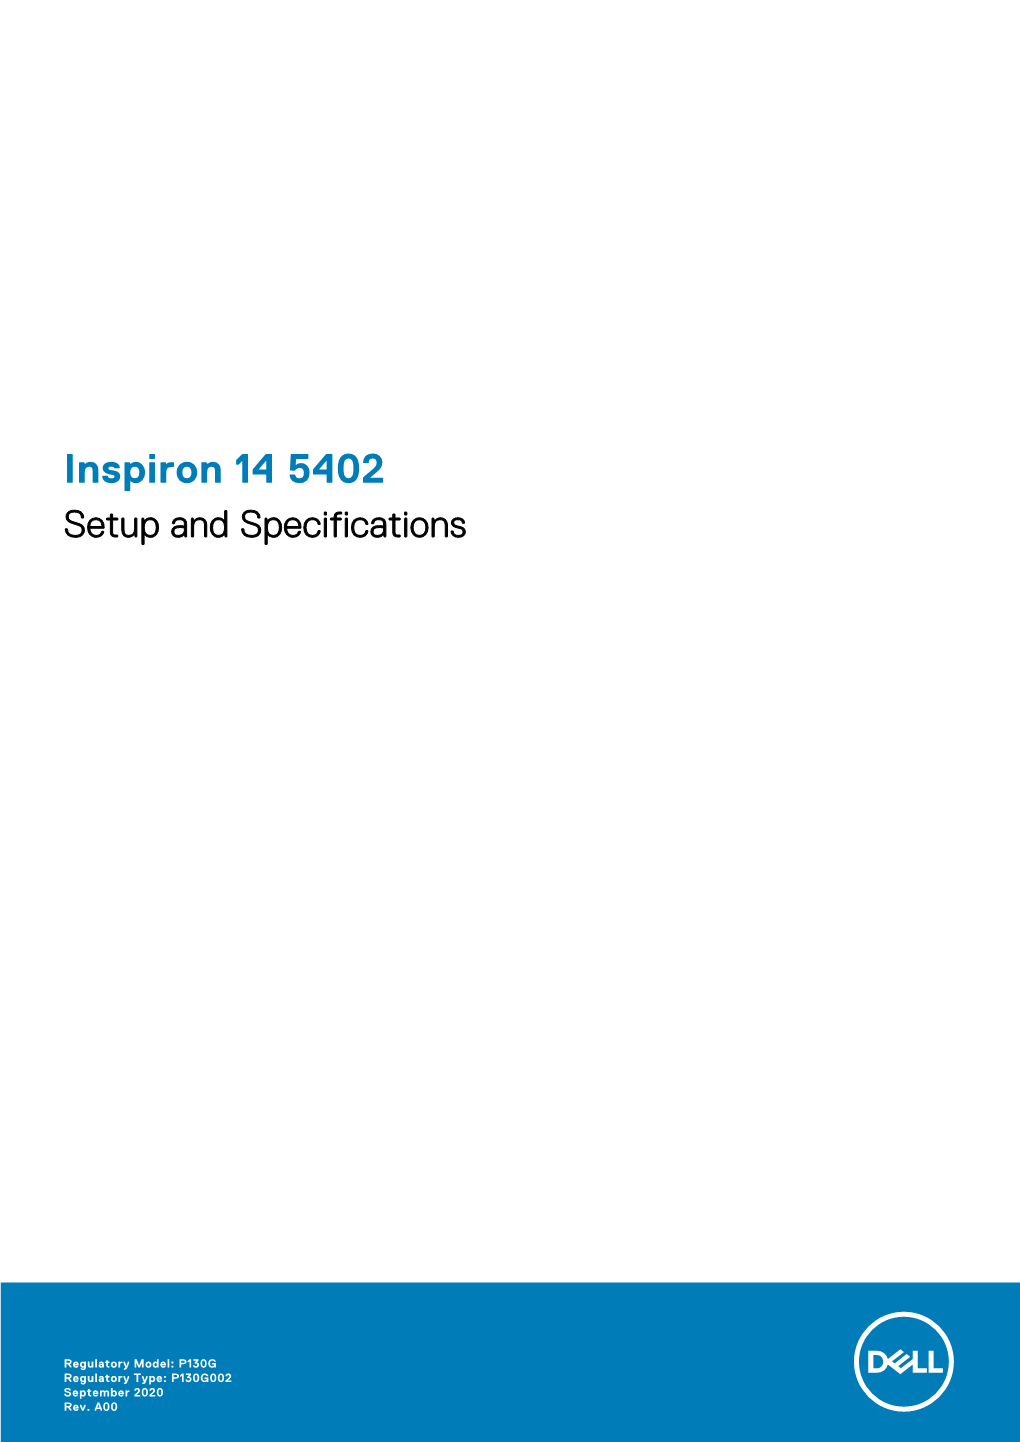 Inspiron 14 5402 Setup and Specifications